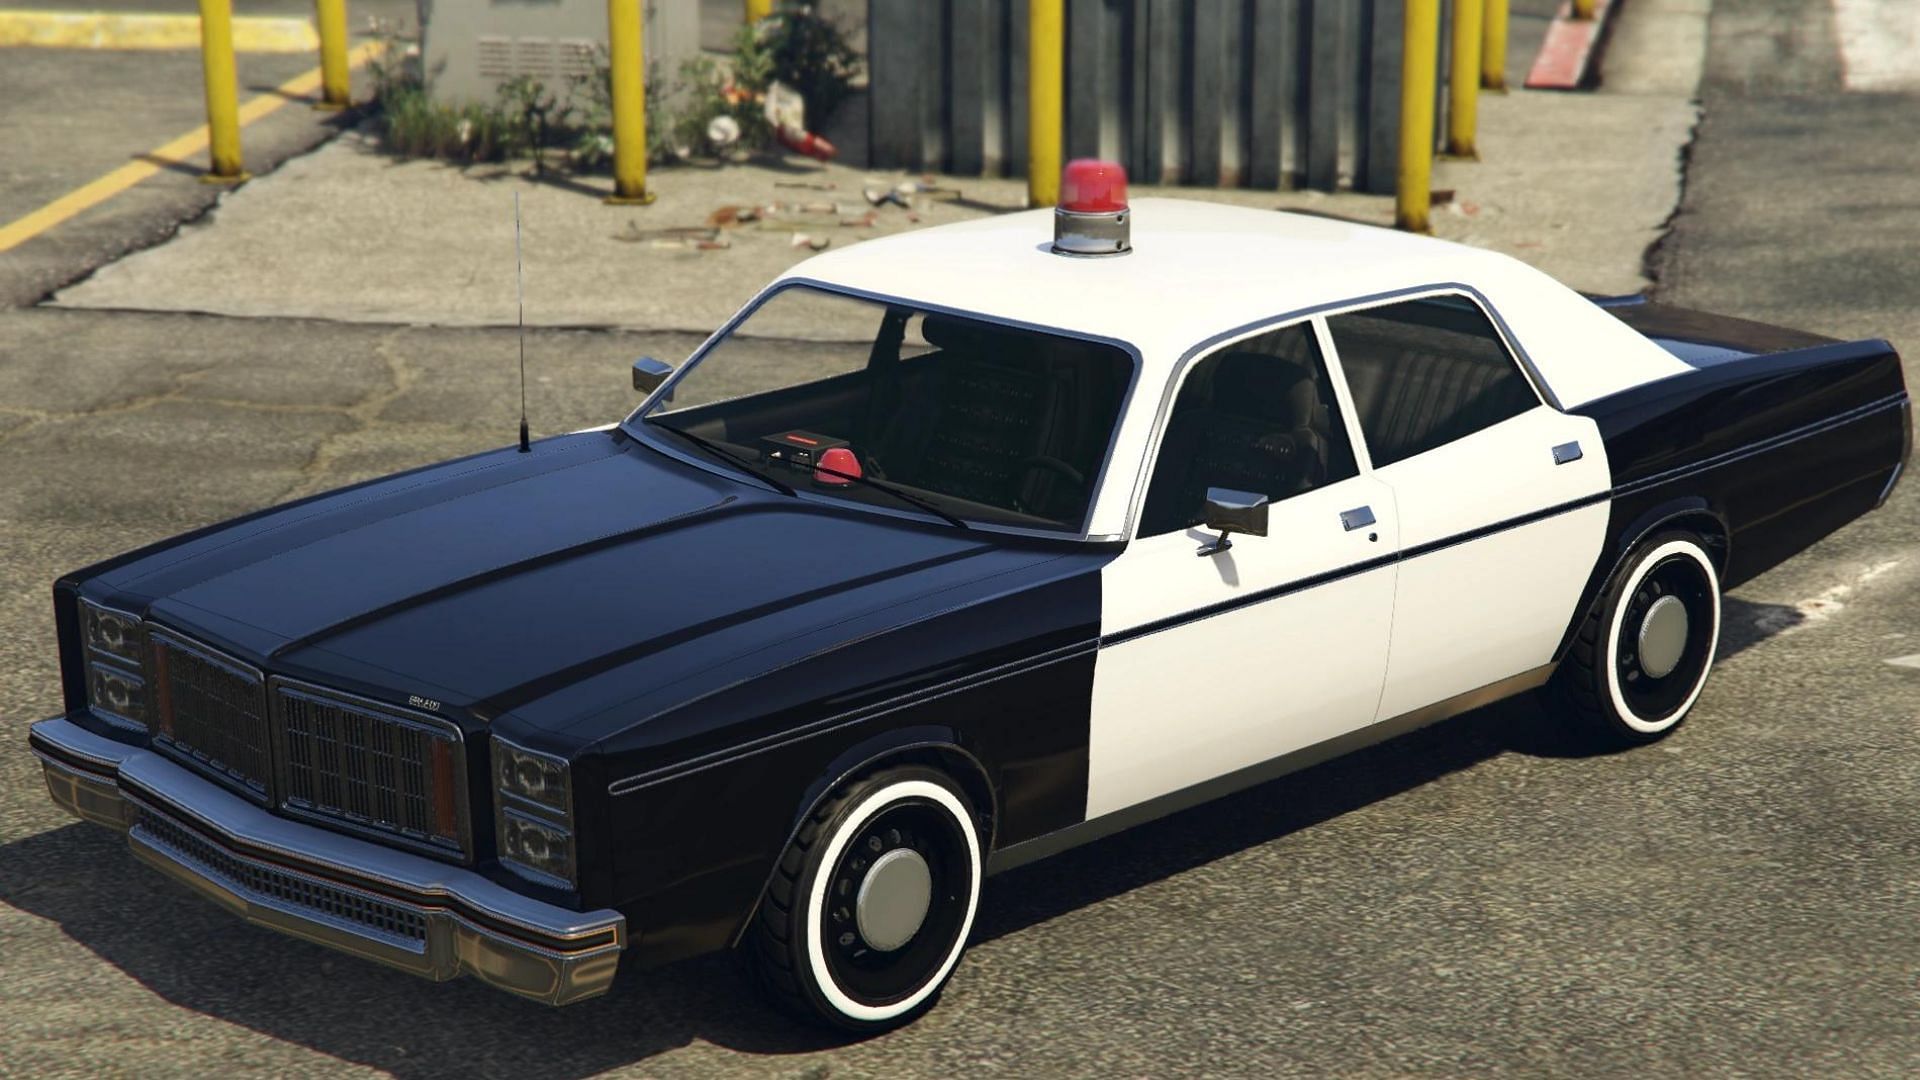 Greenwood Cruiser is one of the best cop cars in the game (Image via Rockstar Games)